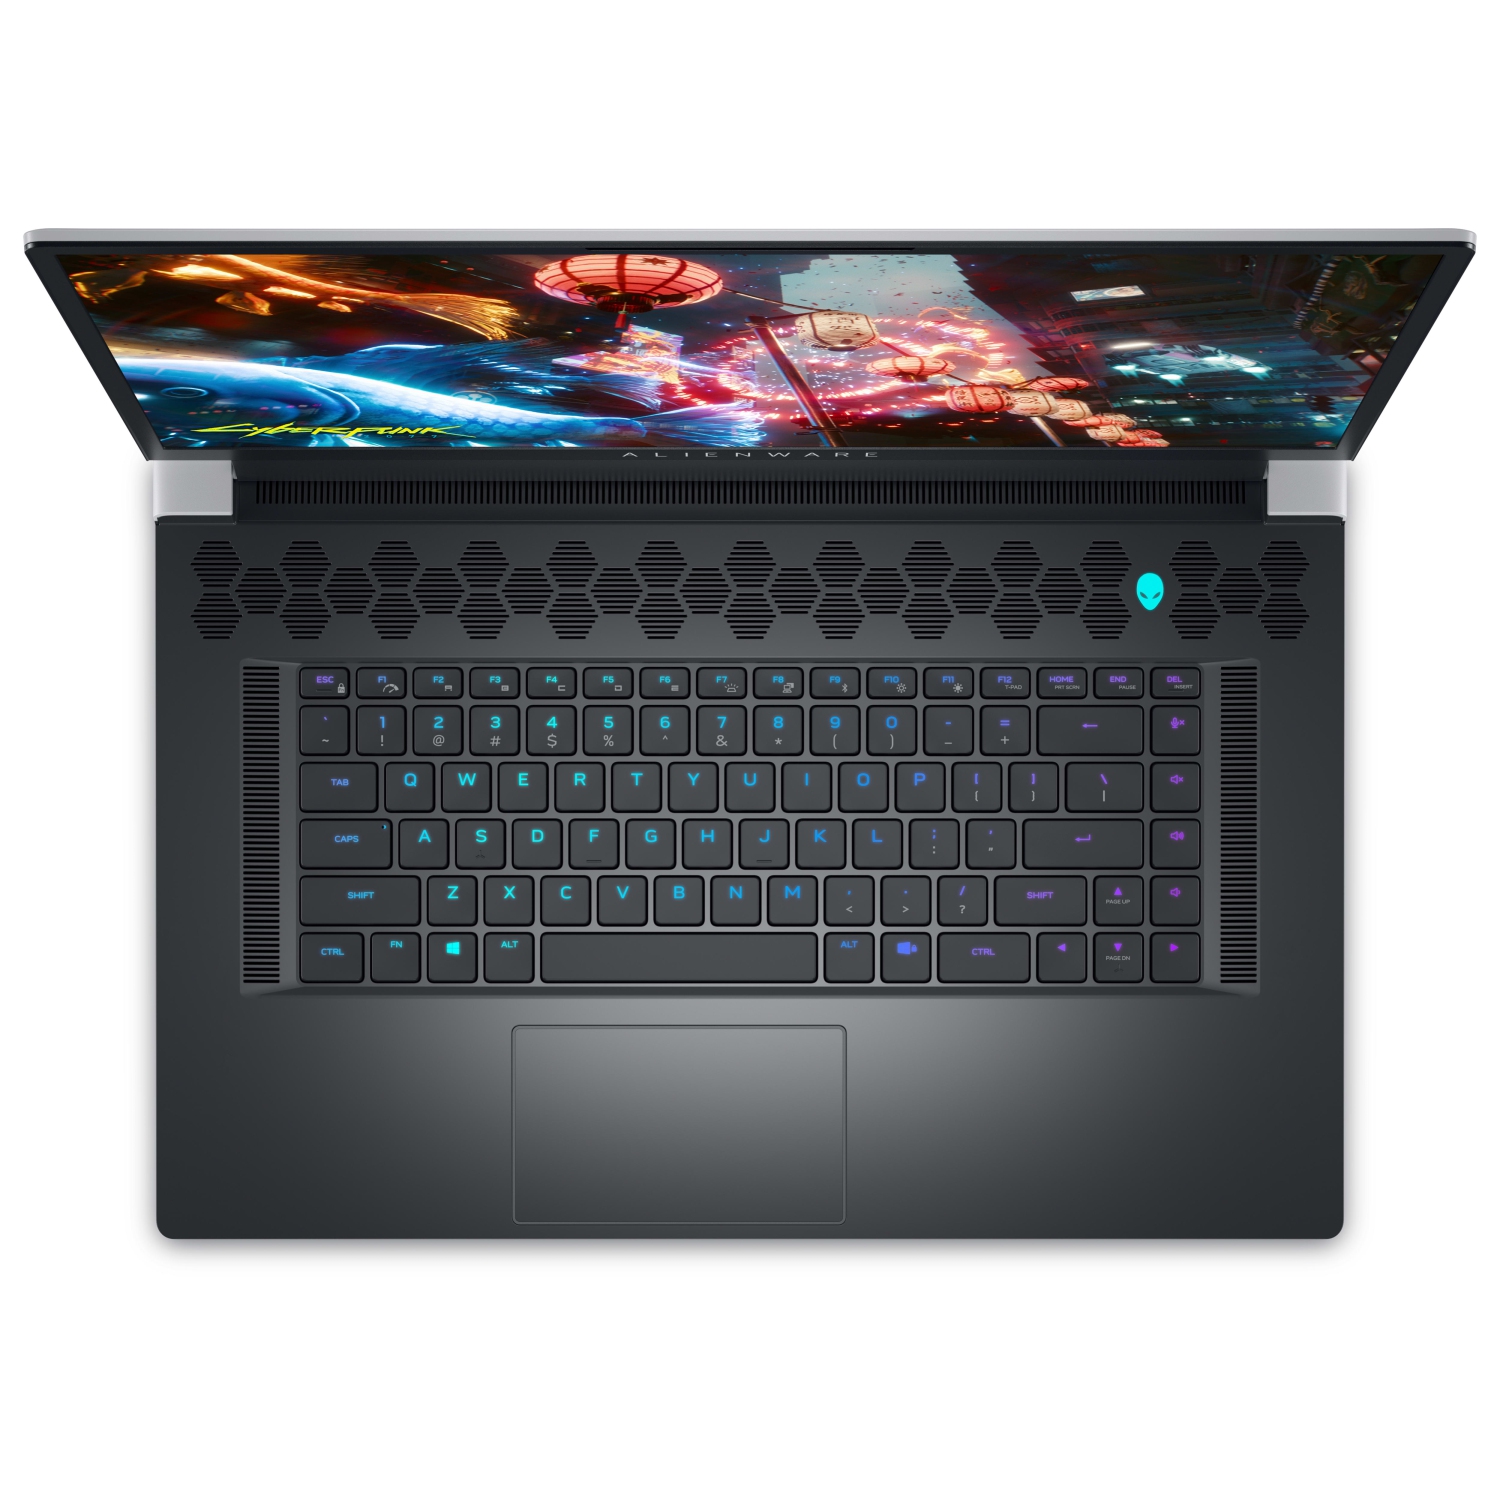 Refurbished (Excellent) – Dell Alienware X17 R2 Gaming Laptop (2022) | 17.3" FHD | Core i7 - 2TB SSD + 2TB SSD - 64GB RAM - RTX 3060 | 14 Cores @ 4.7 GHz - 12th Gen CPU - 6GB GDDR6